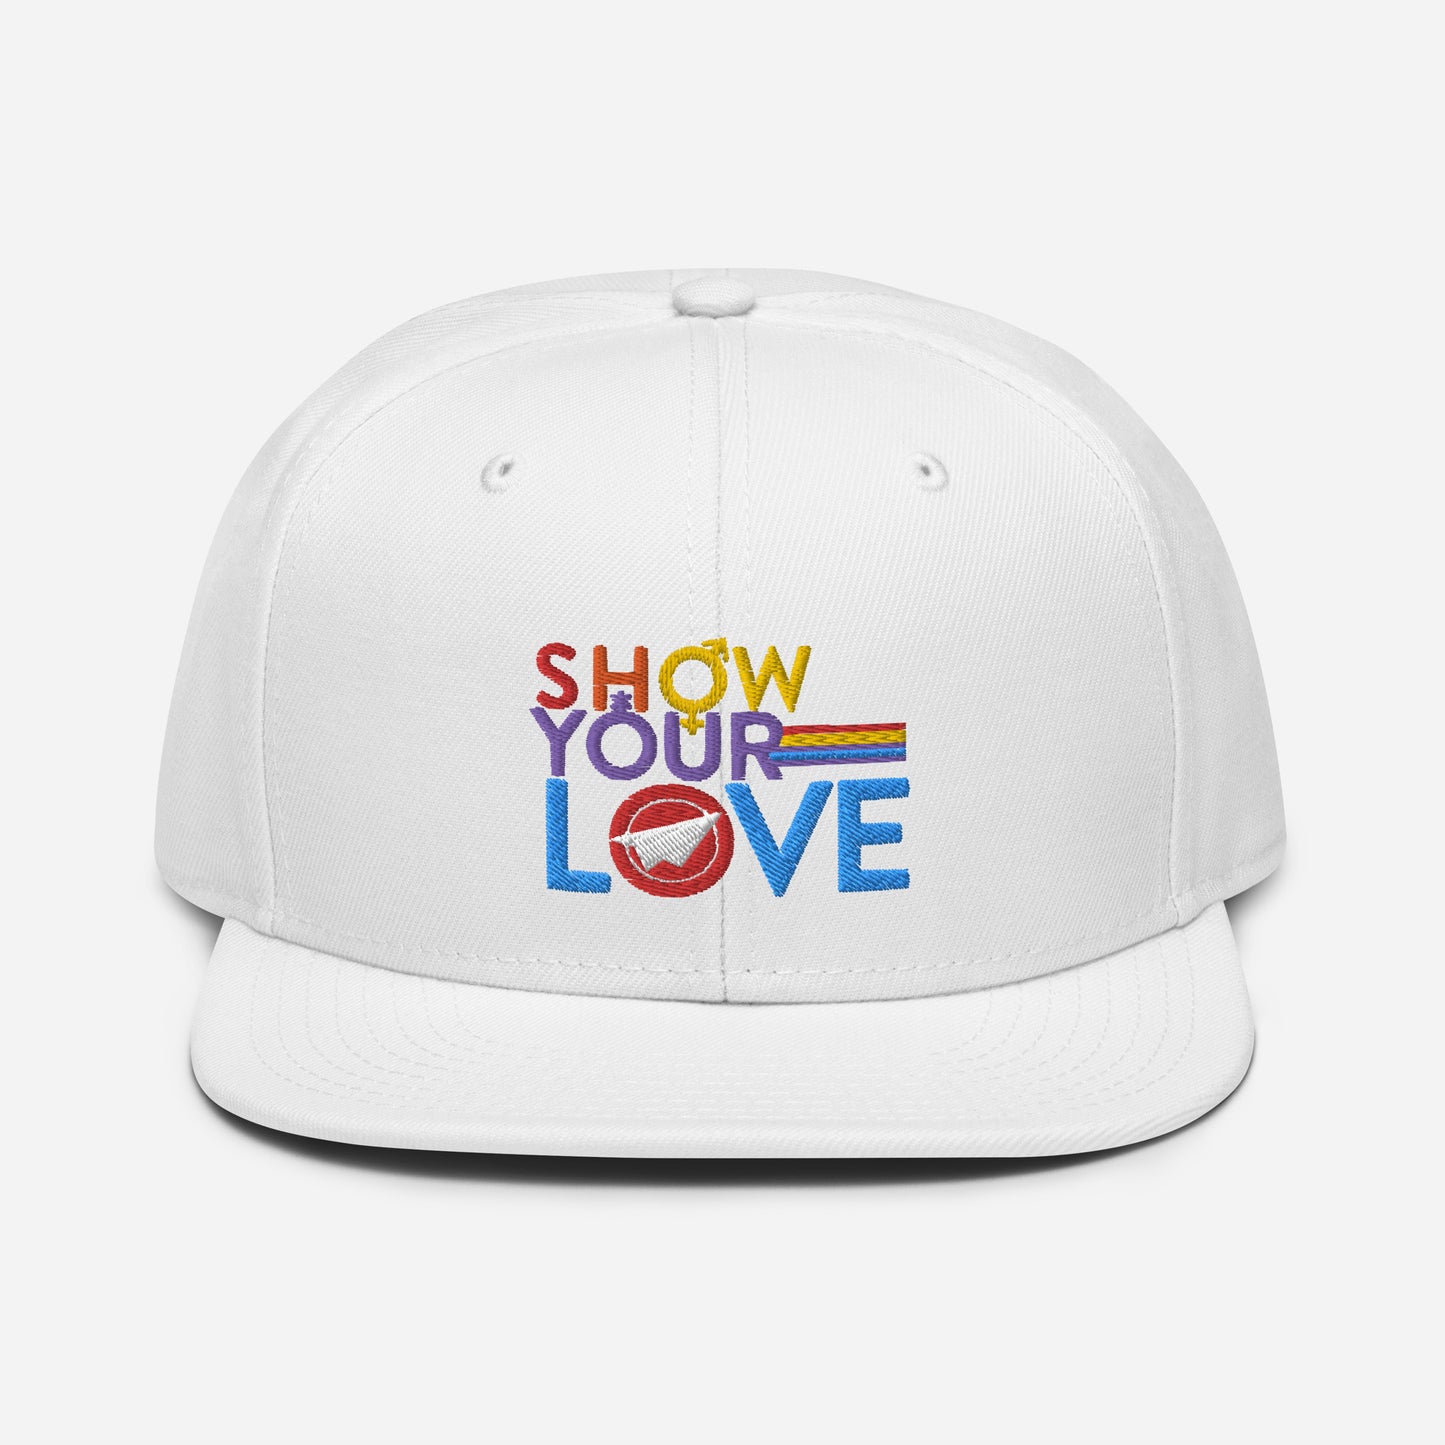 Show Your Love Snapback Hat